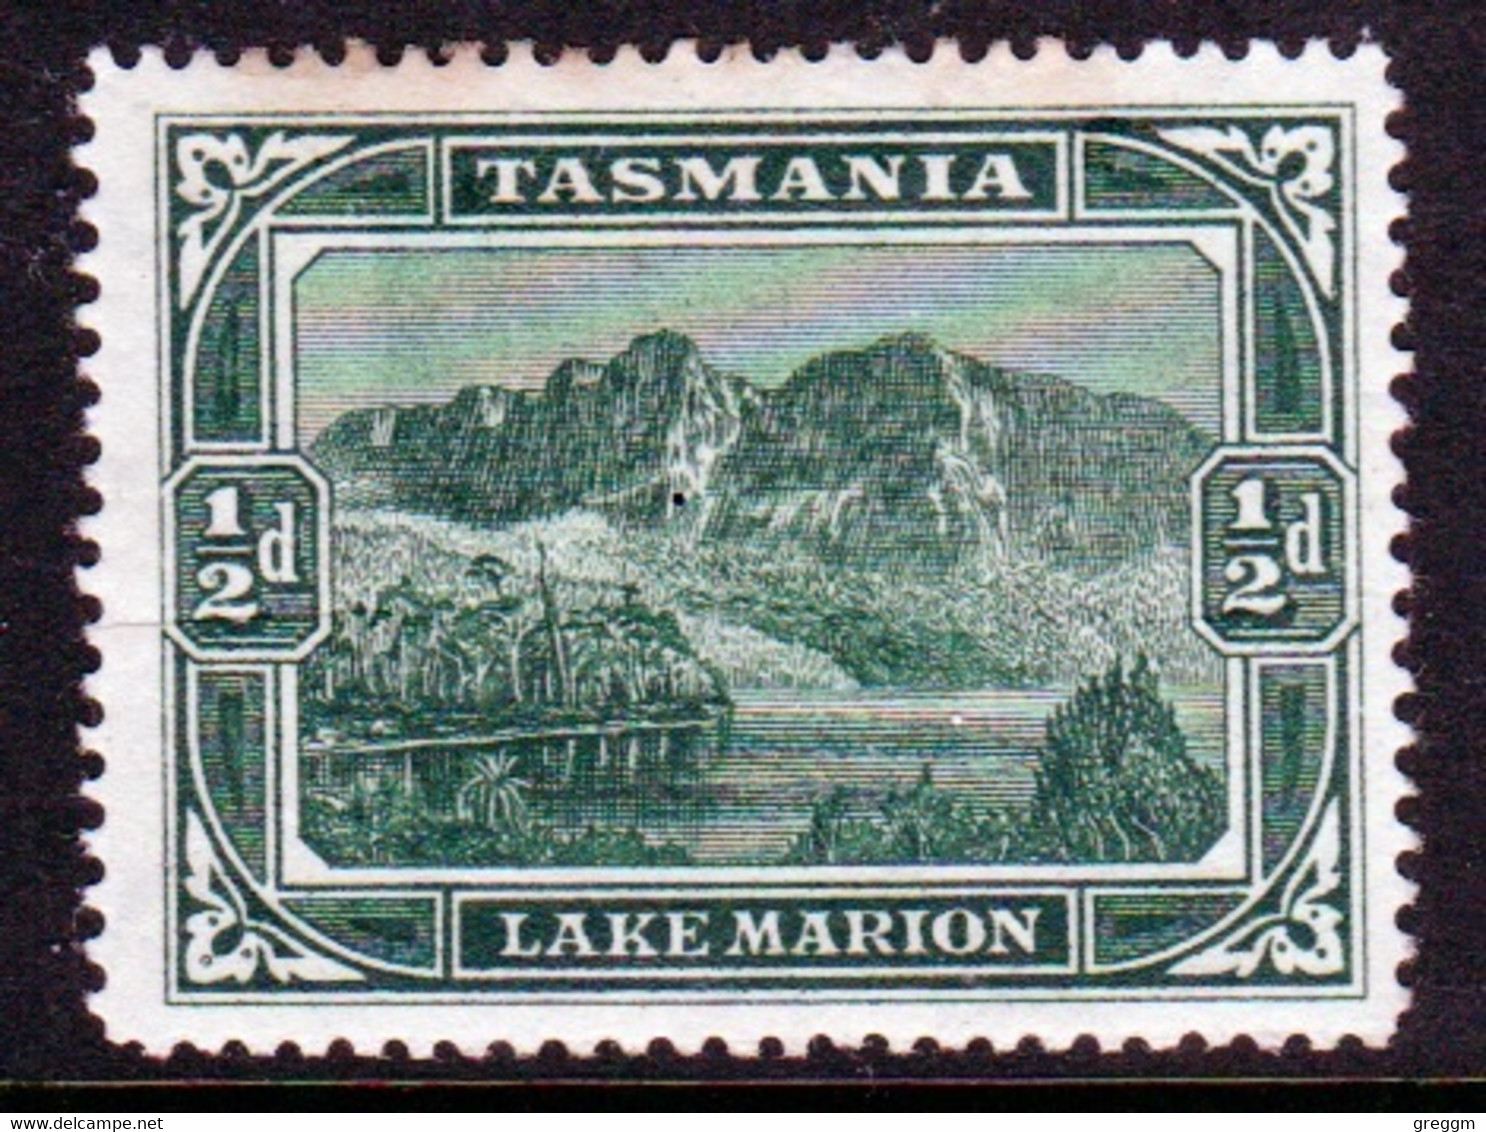 Tasmania 1899 Single  ½d Stamp In Mounted Mint With Slight Toning On Top Edge.. - Mint Stamps